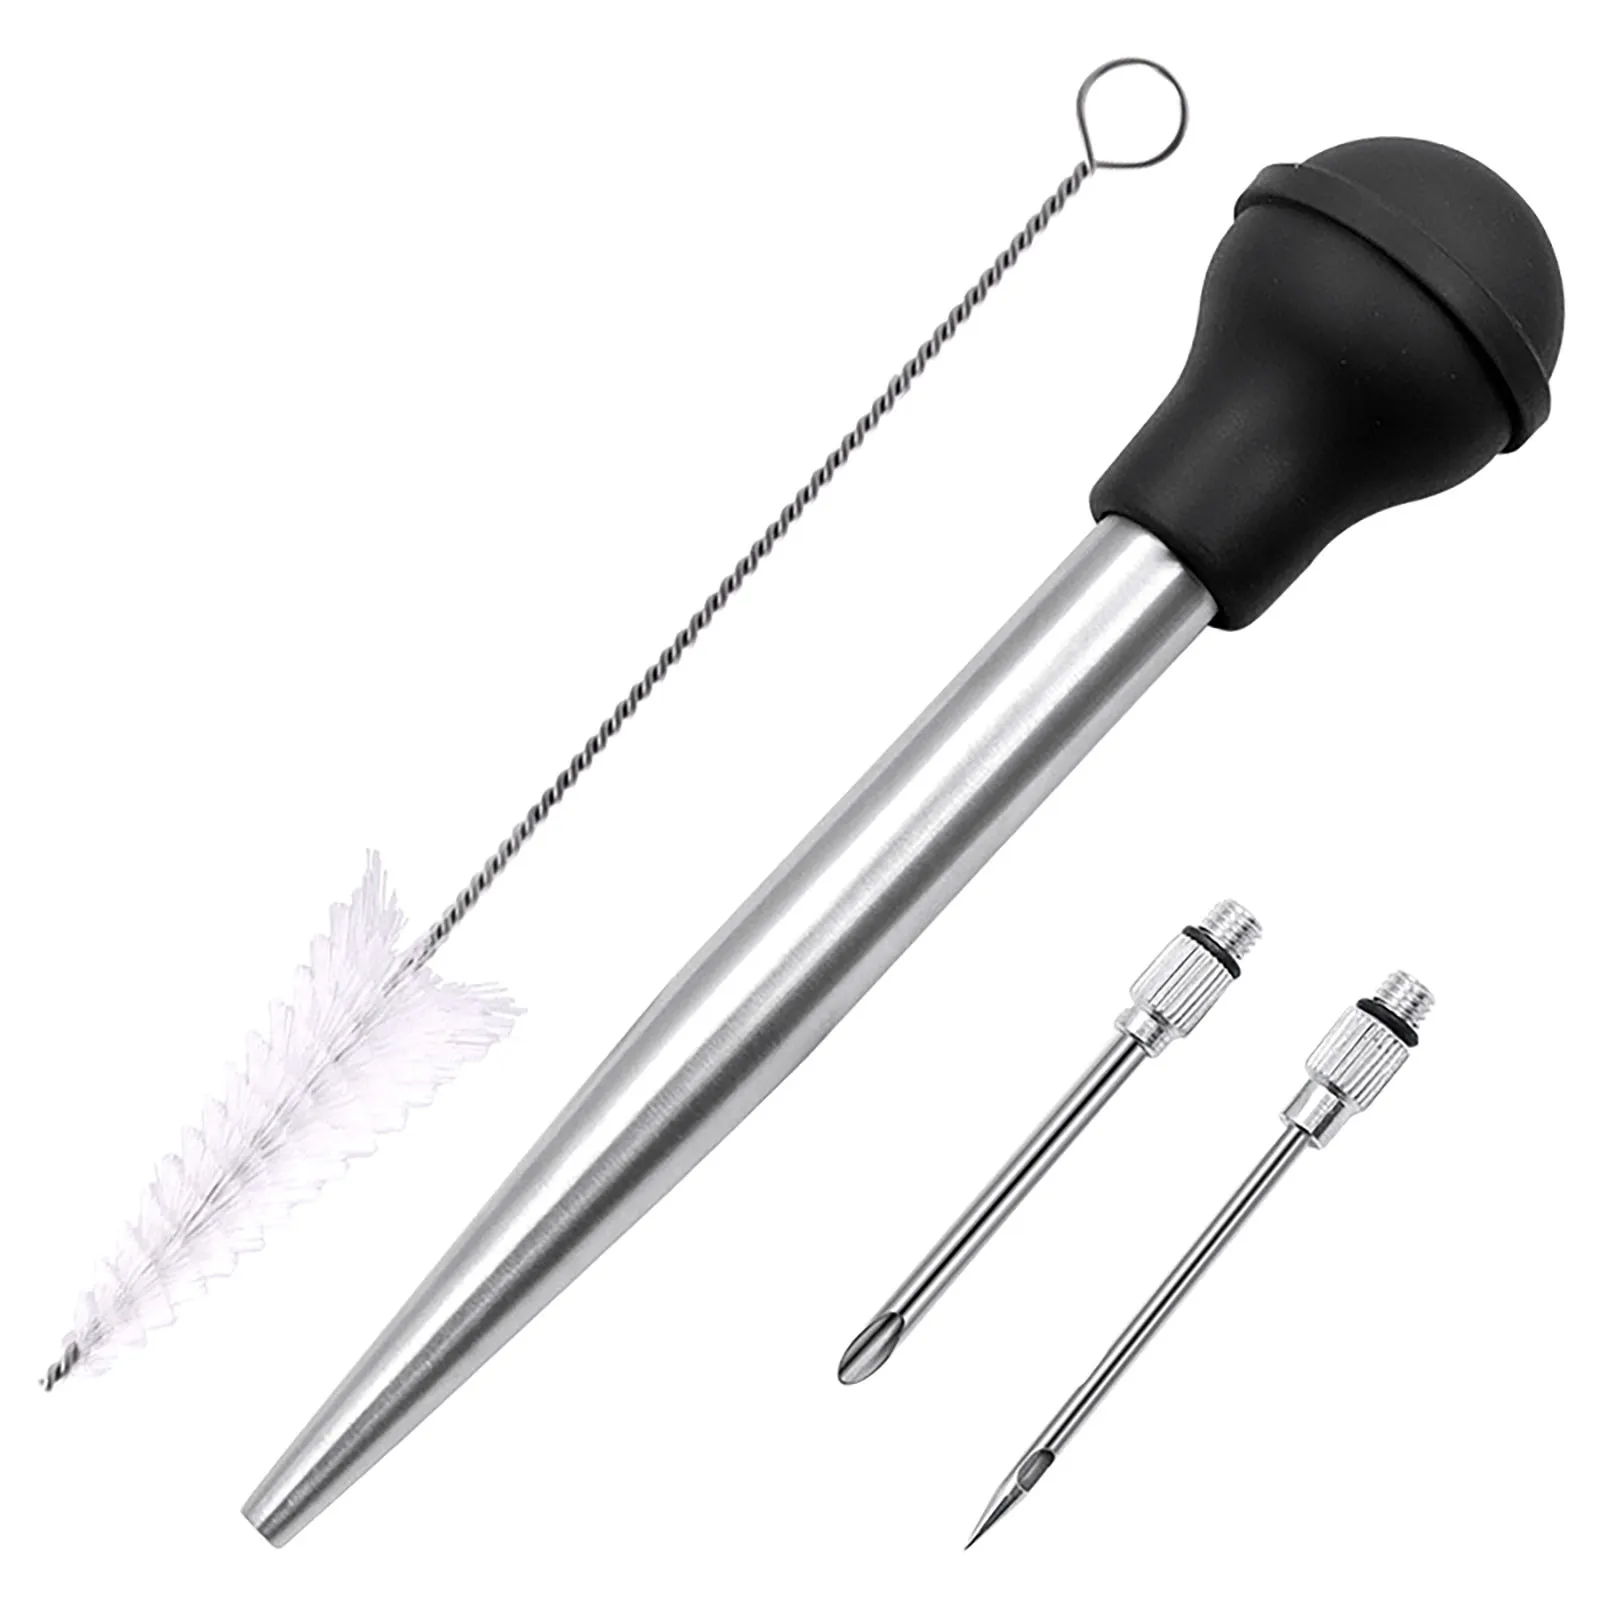 https://ae01.alicdn.com/kf/Sc14624ec8f13414297264ac44bdc4e73K/Stainless-Steel-Turkey-Baster-Baster-Syringe-For-Cooking-Meat-Injector-Set-With-2-Marinade-Needles-1.jpg